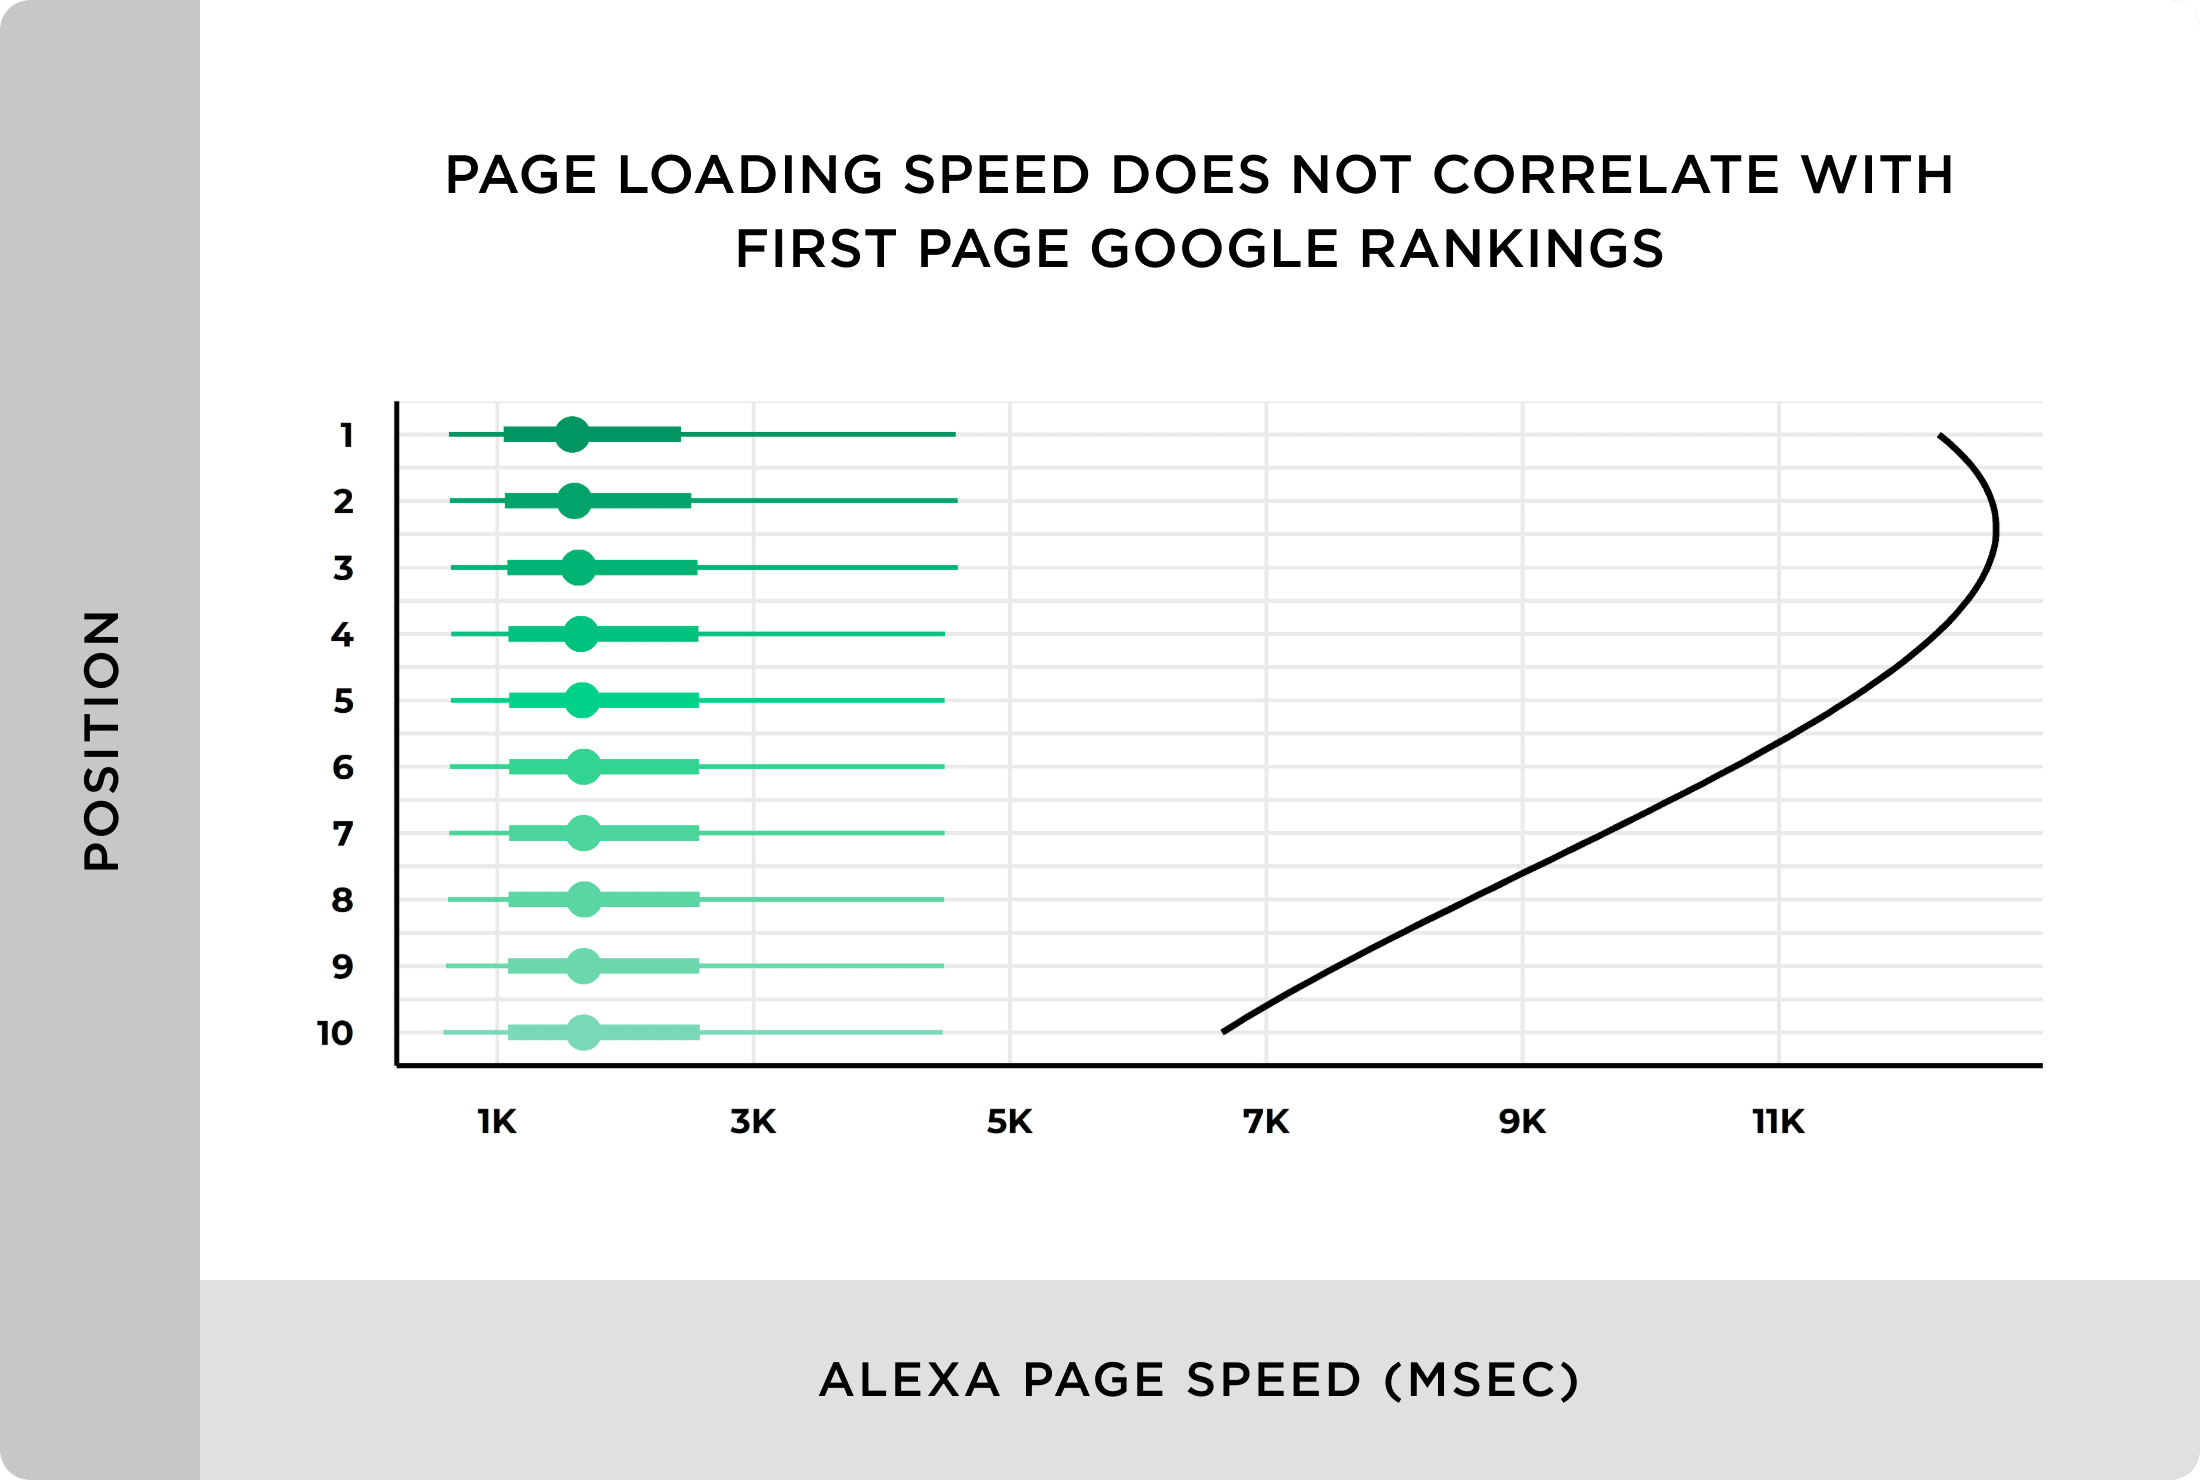 Page loading speed does not correlate with first page Google rankings